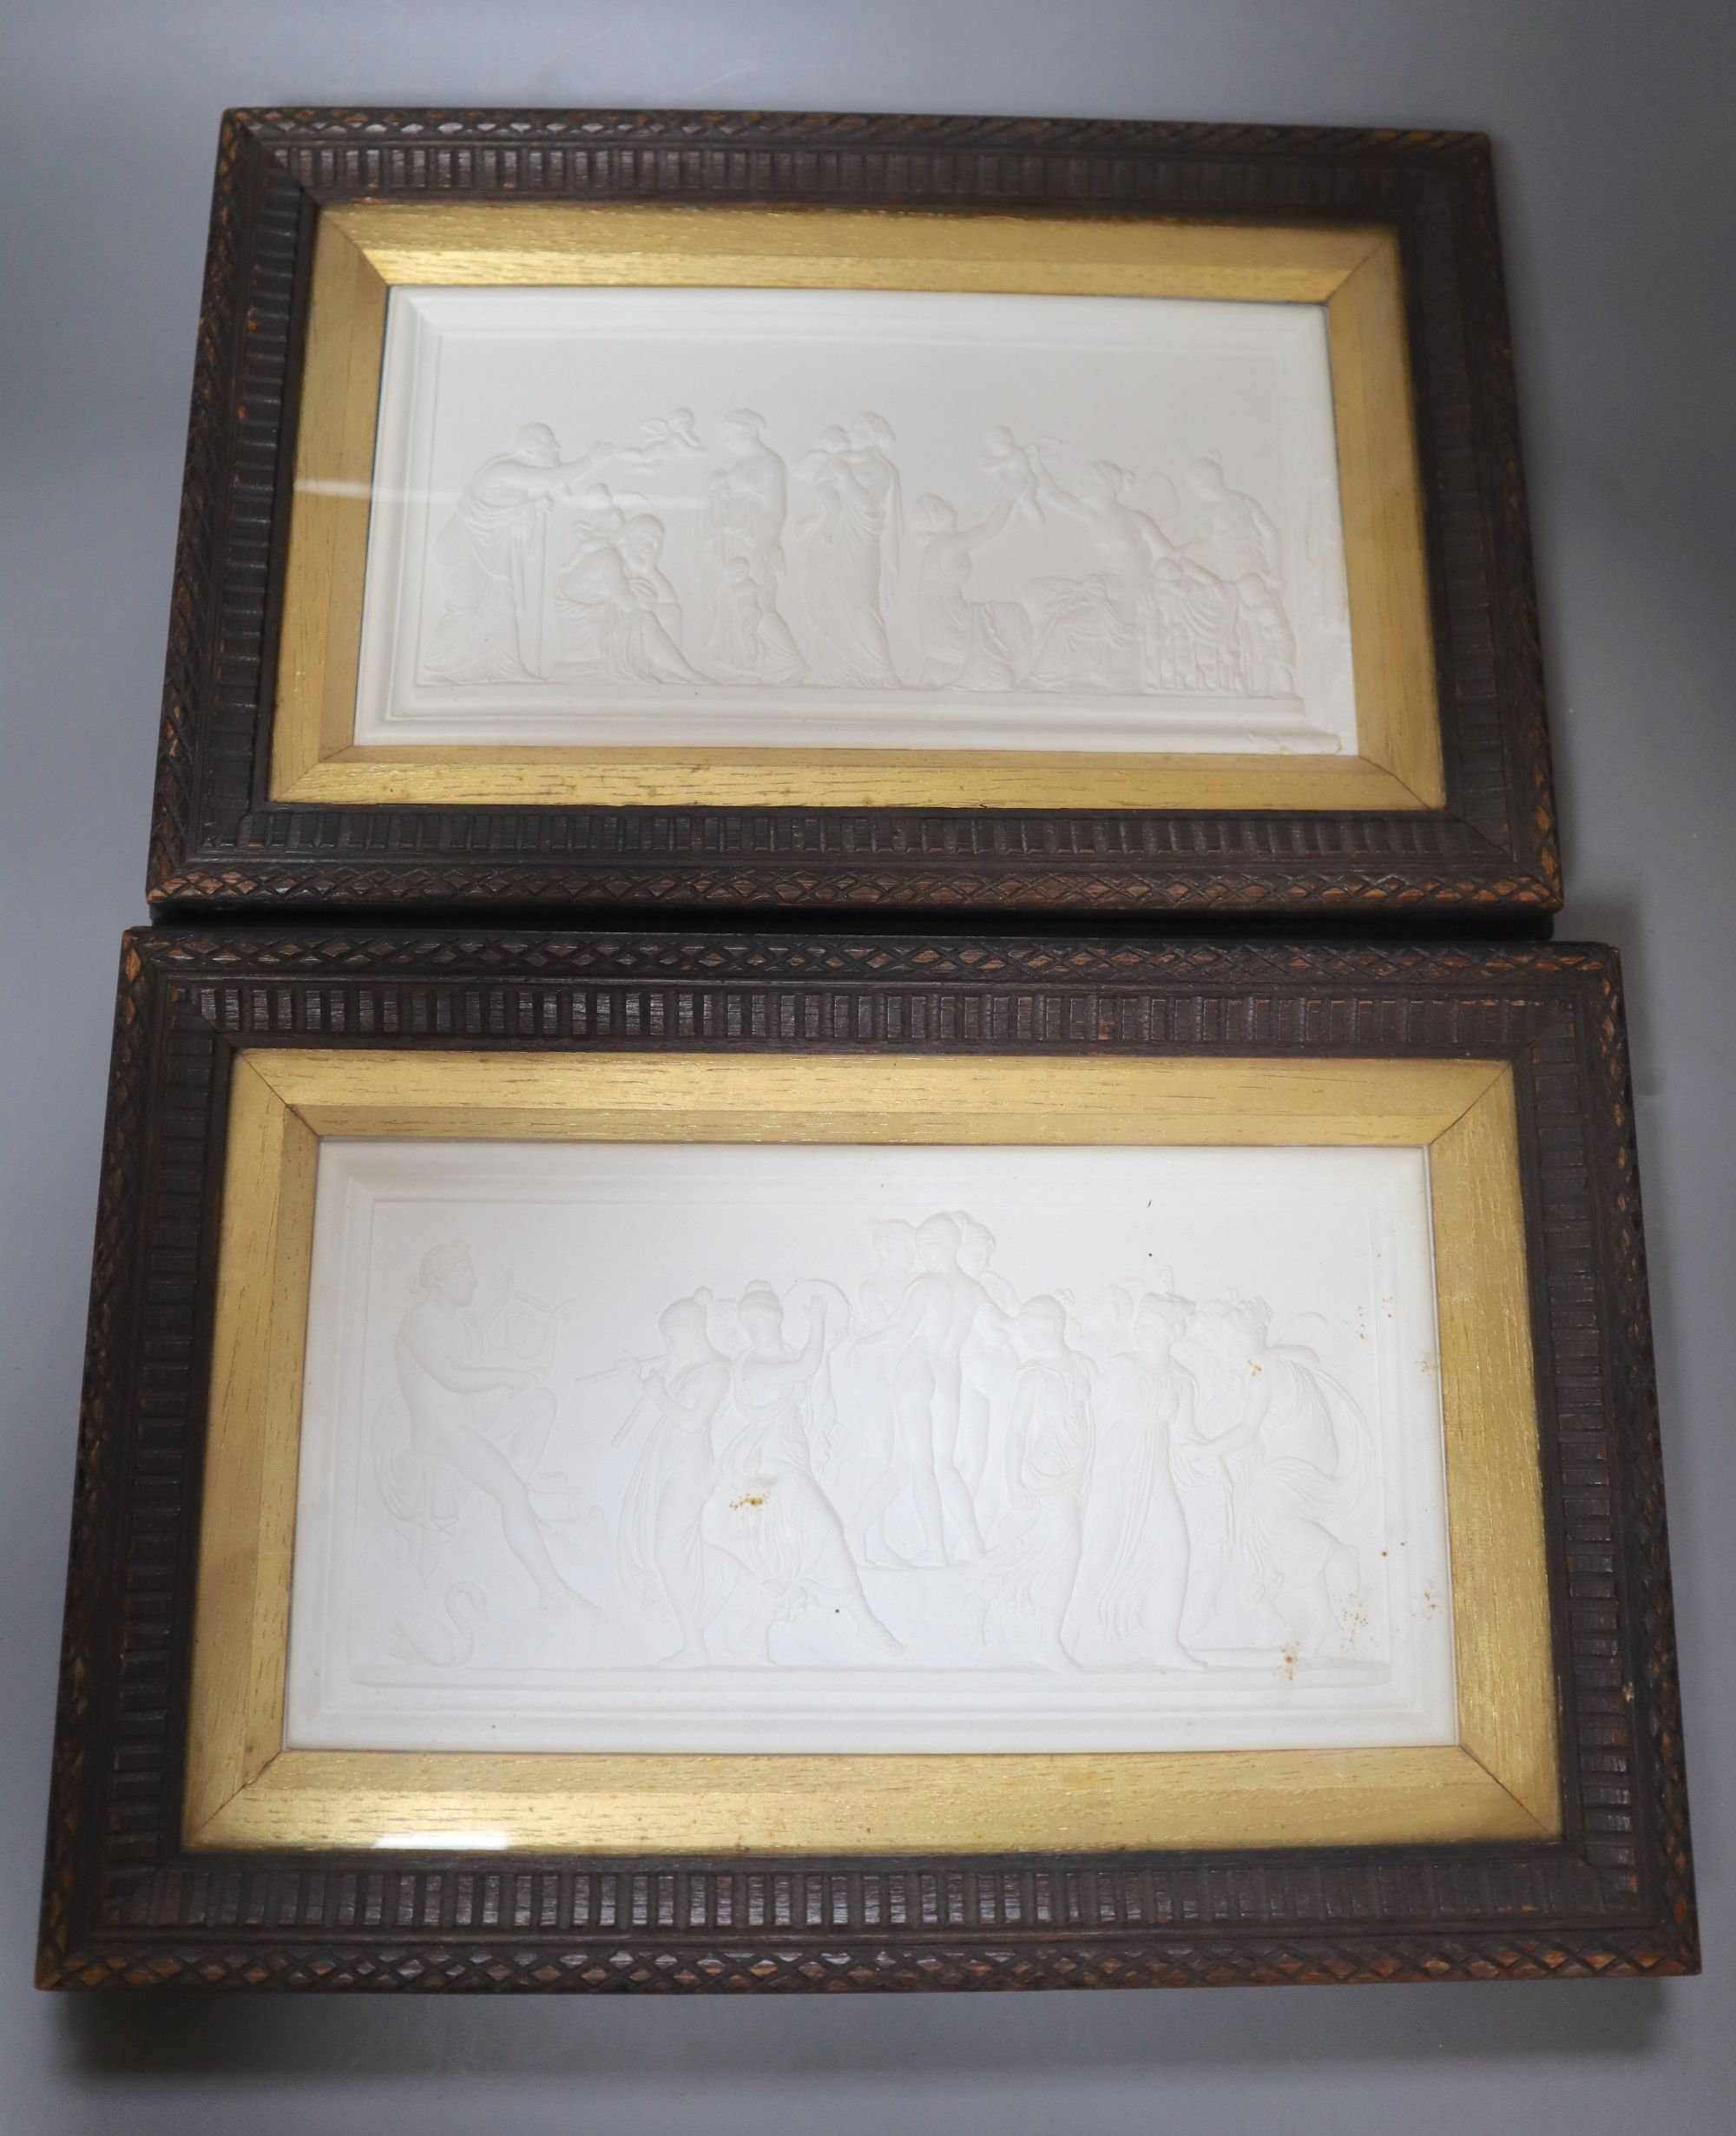 After Bertel Thorvaldsen (Danish 1768-1844), Dance of the Muses, plaster plaque and companion piece, a pair, 14 x 26cm excl. frames